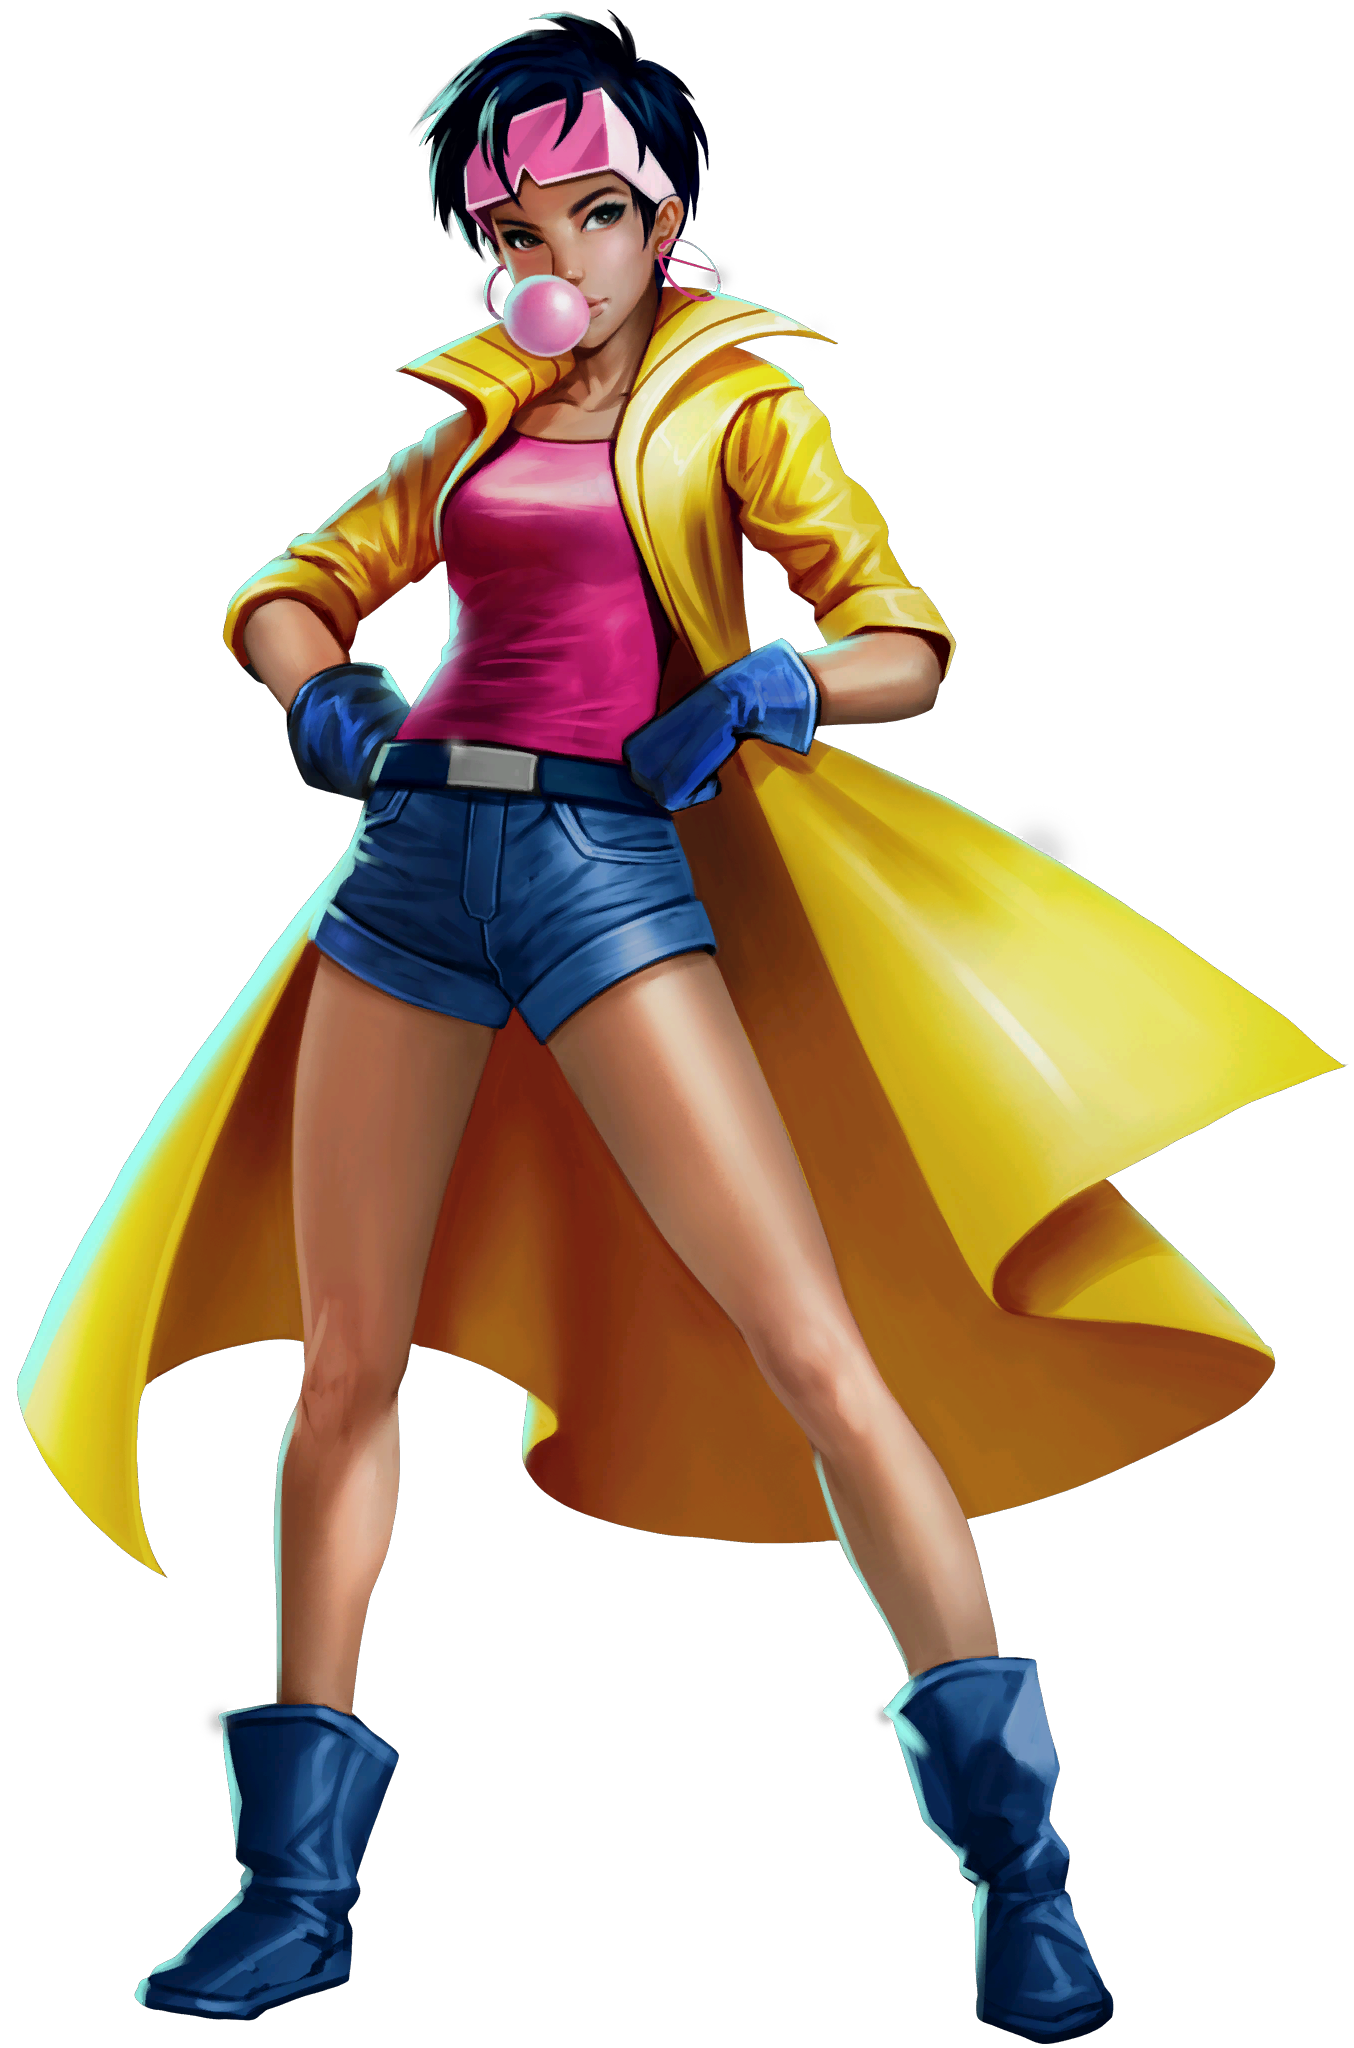 Finally Got Anime Jubilee In My Shop. Couldn't Have Hit Buy Faster :  r/MarvelSnap